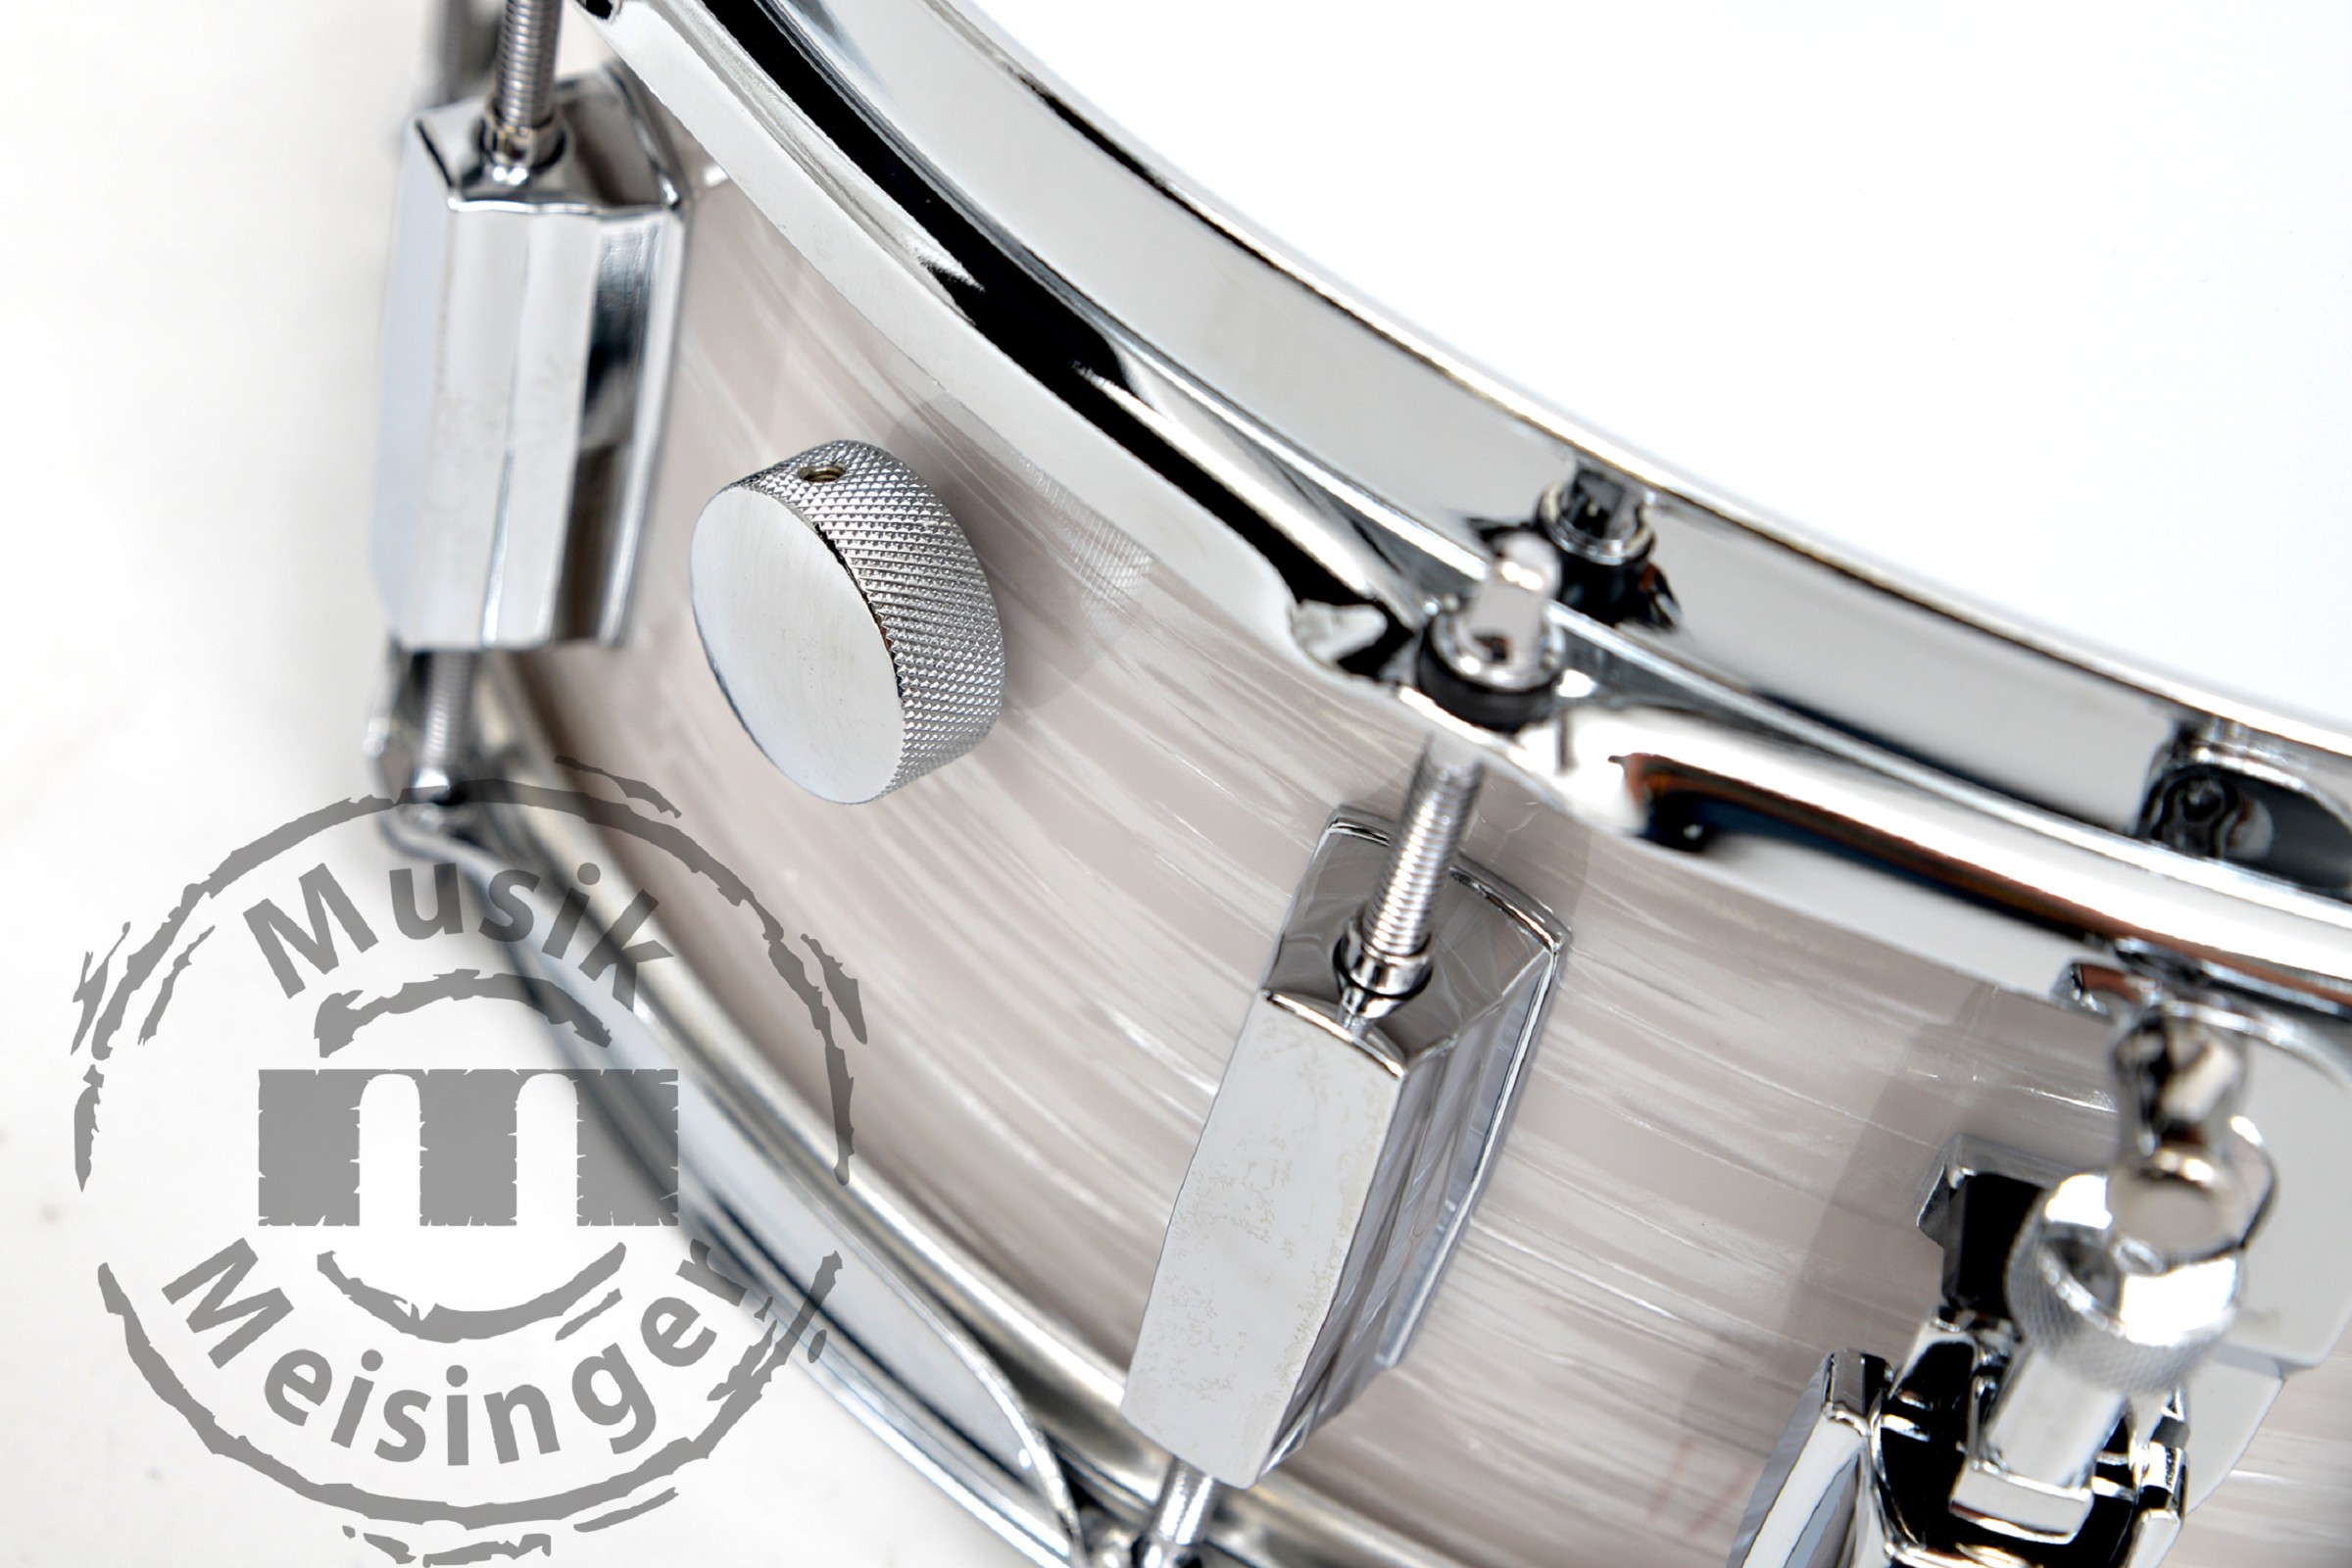 Pearl President Phenolic 14x5,5 Snare Pearl White Oyster